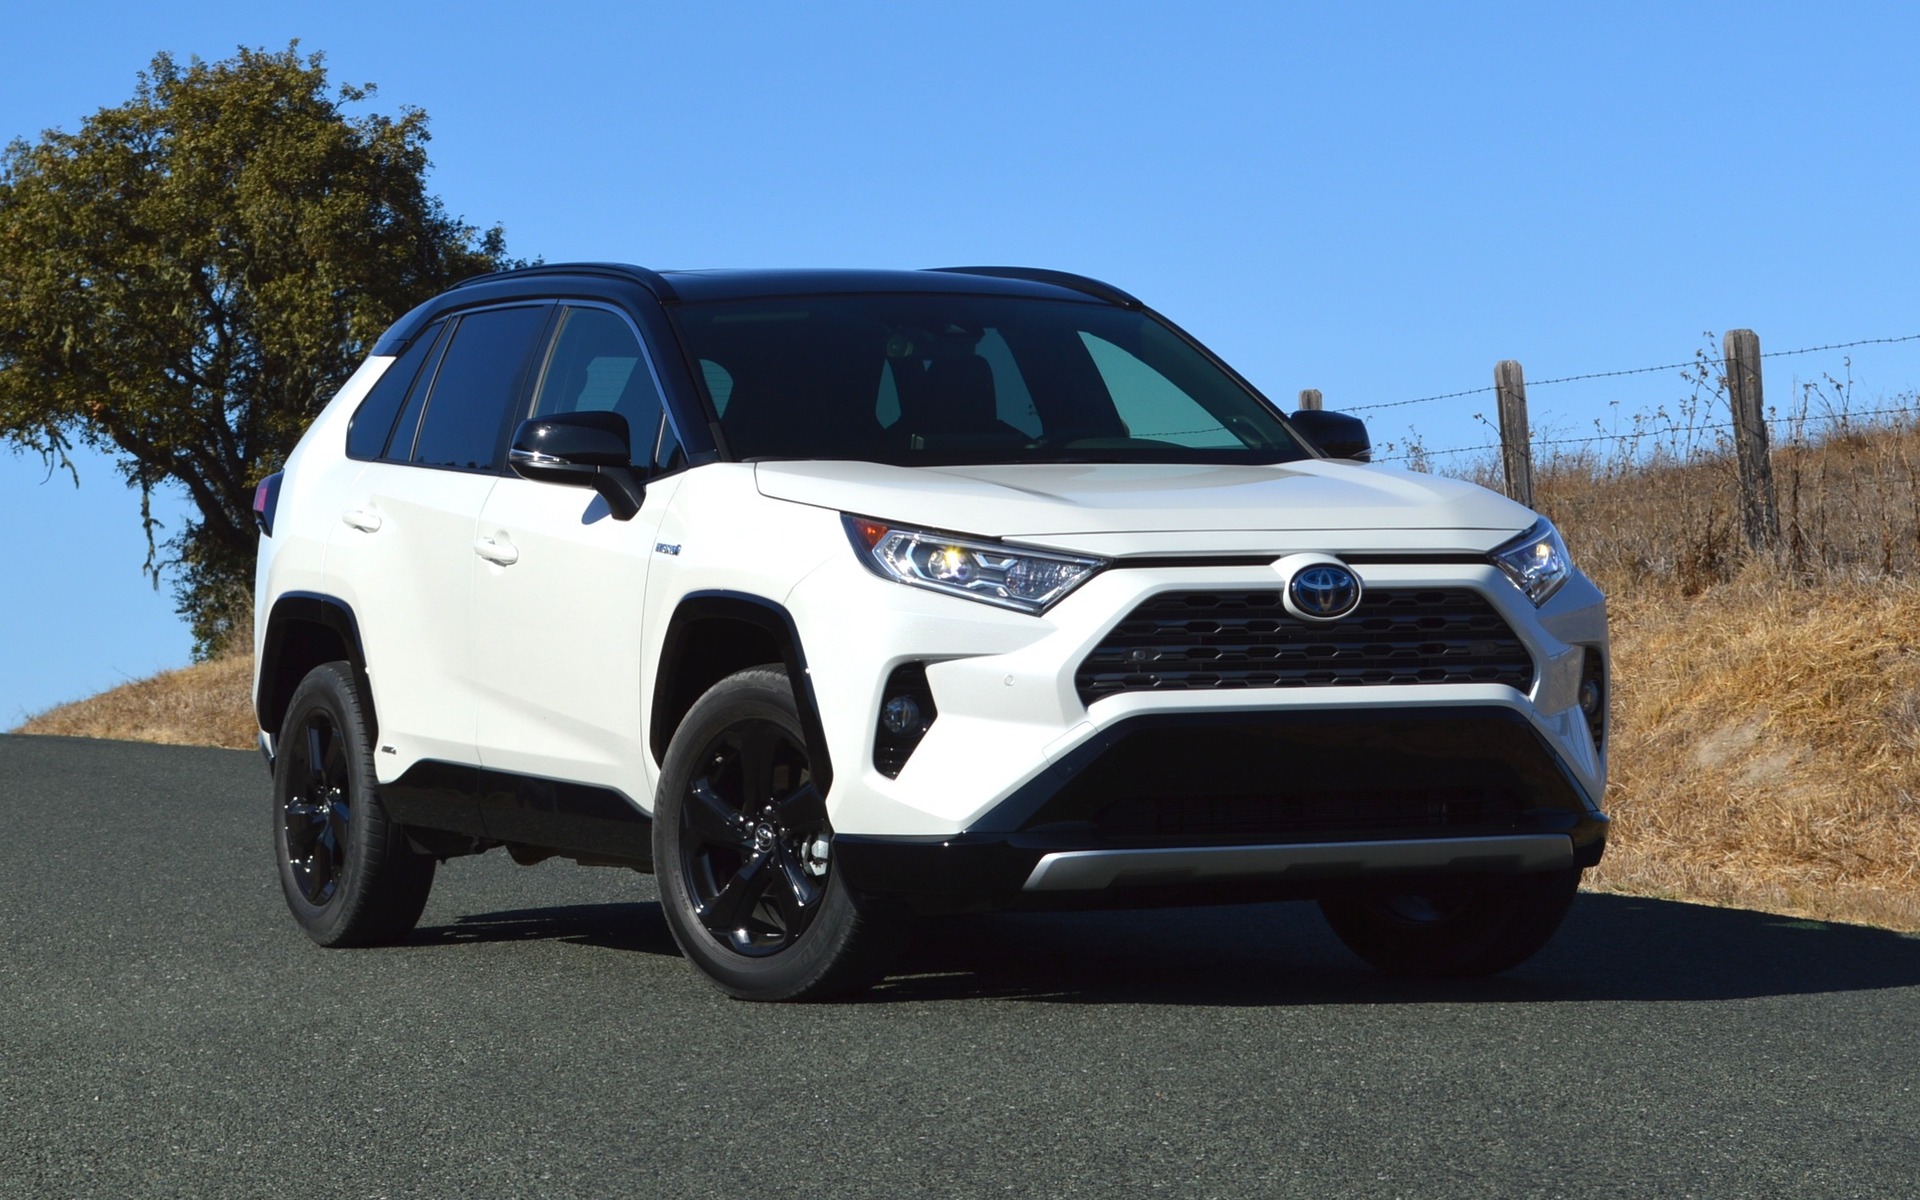 2019 Toyota Rav4 Hybrid Canadian Pricing Announced The Car Guide